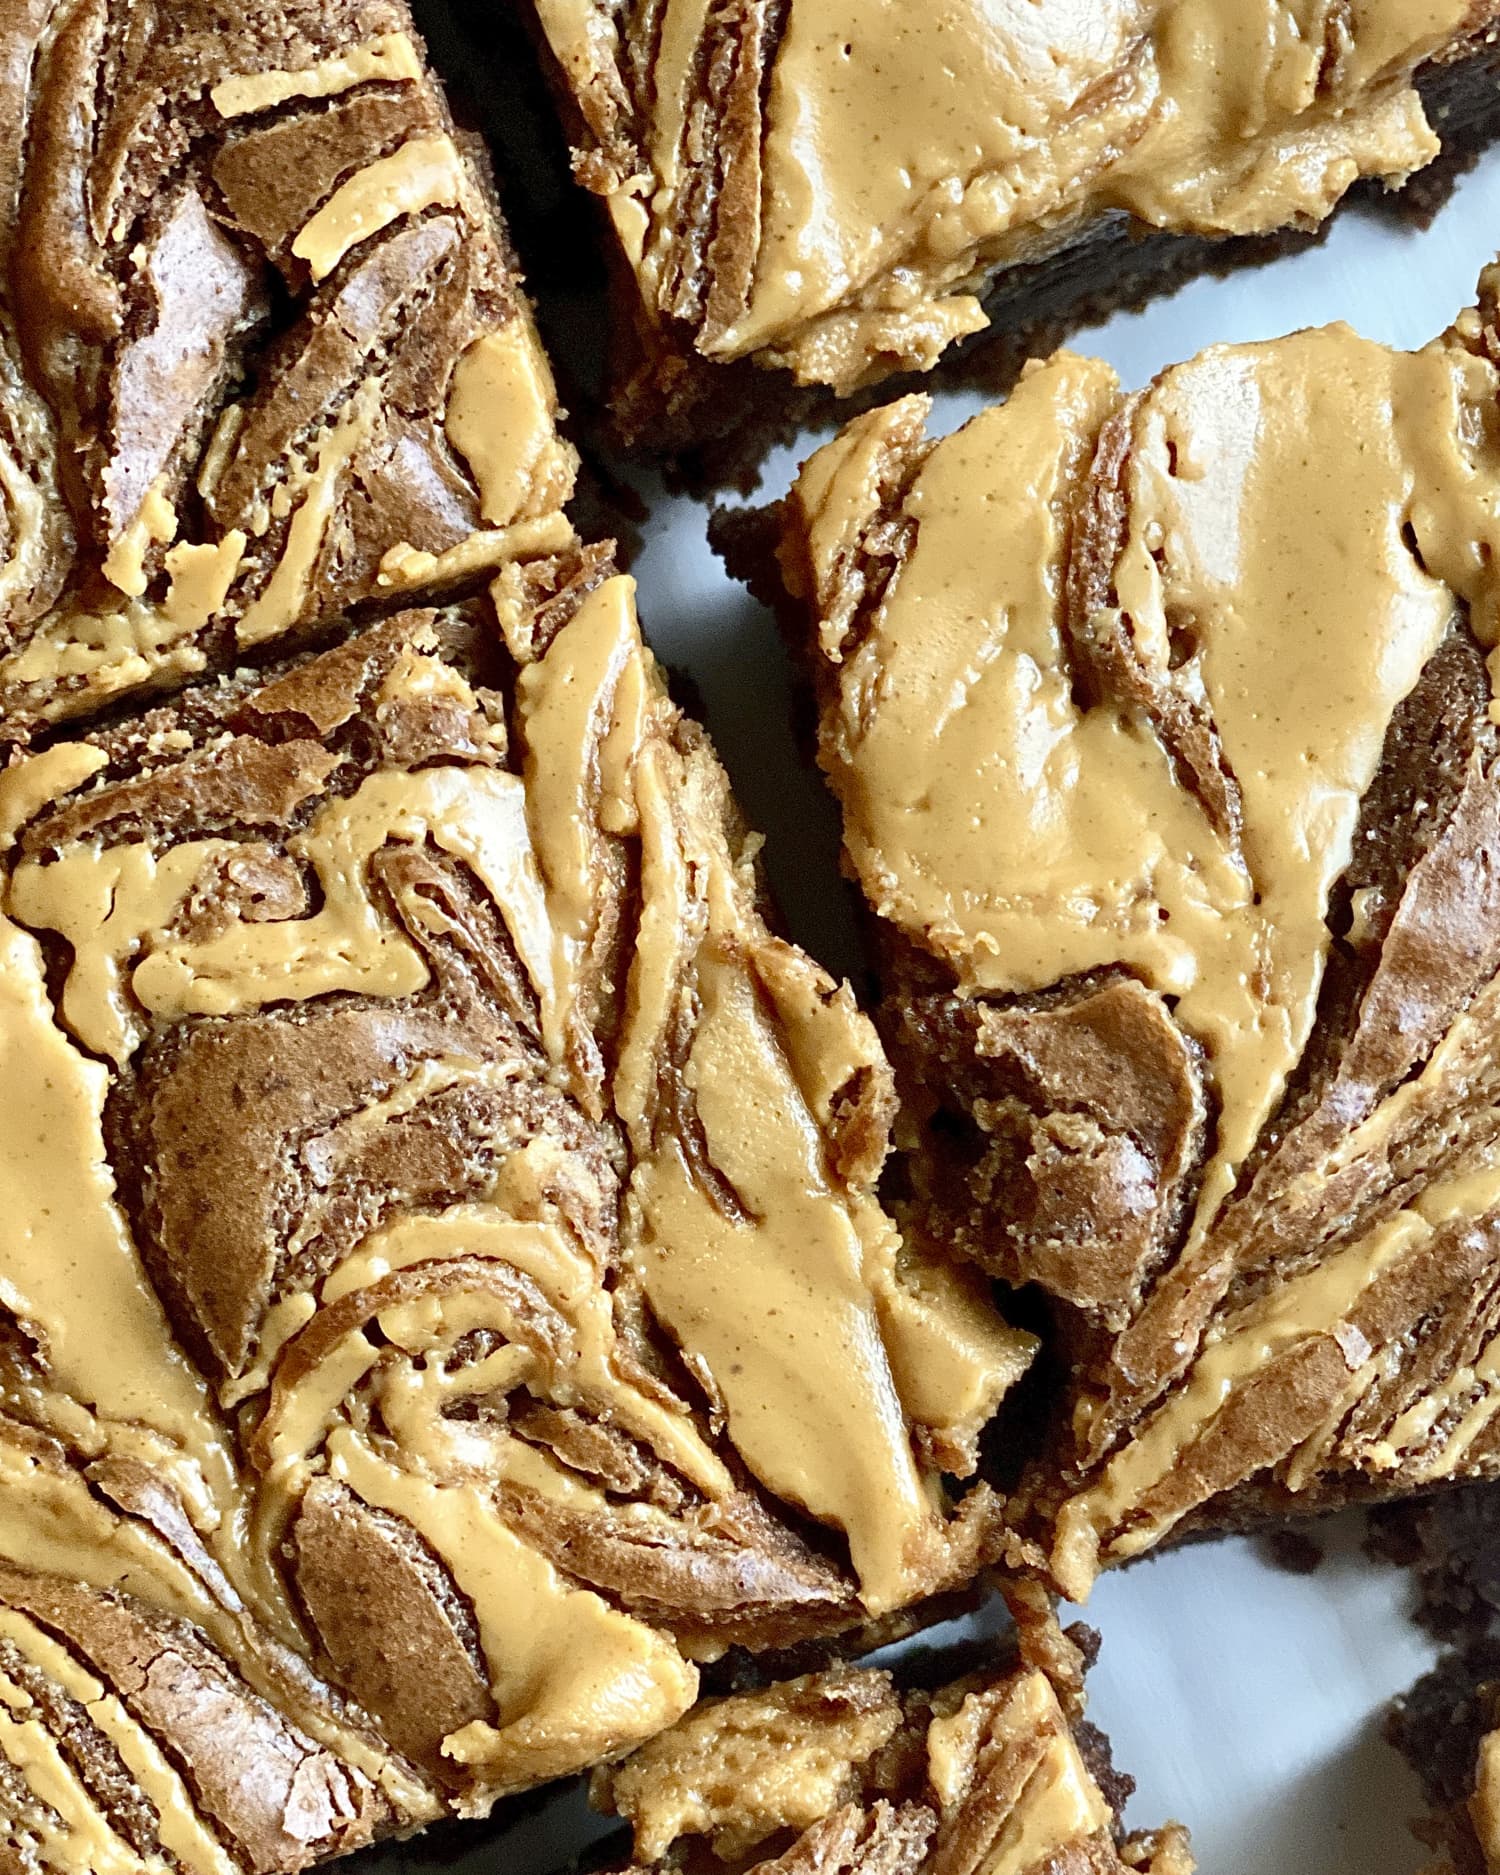 Brownies Get Even Better with a Swirl of Peanut Butter